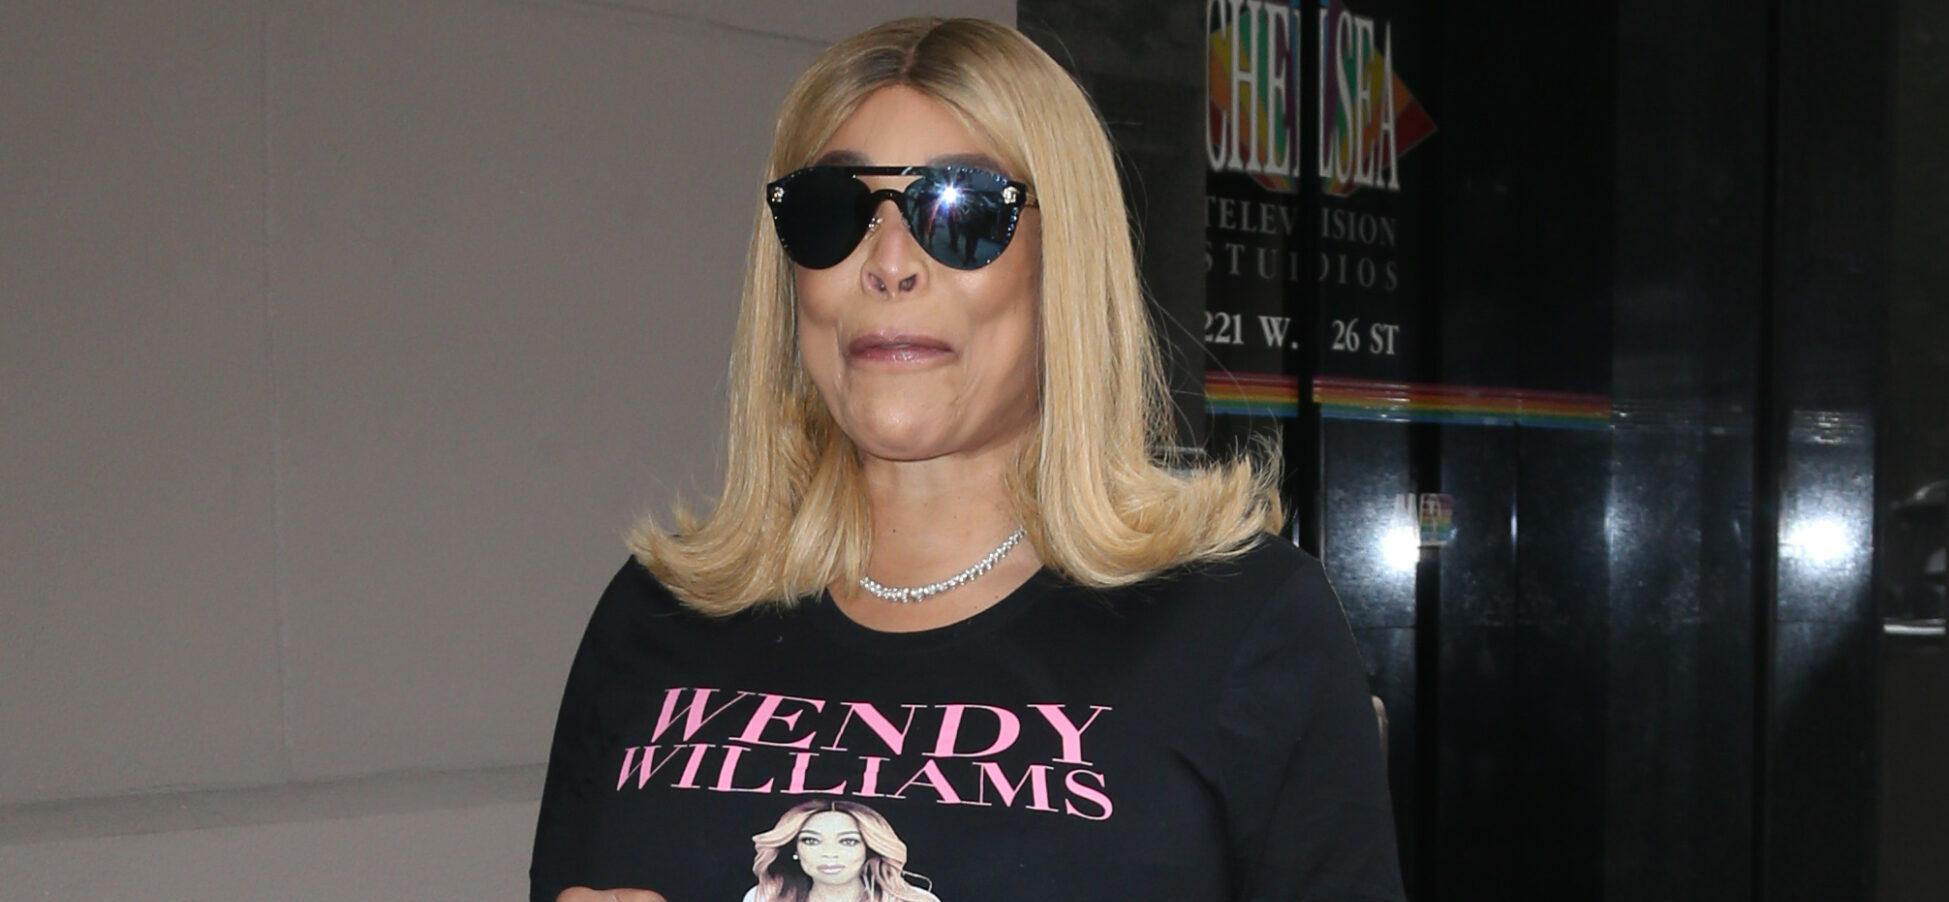 Wendy Williams ‘Strenuously Denies All Allegations’ About Her Deteriorating Mental Health